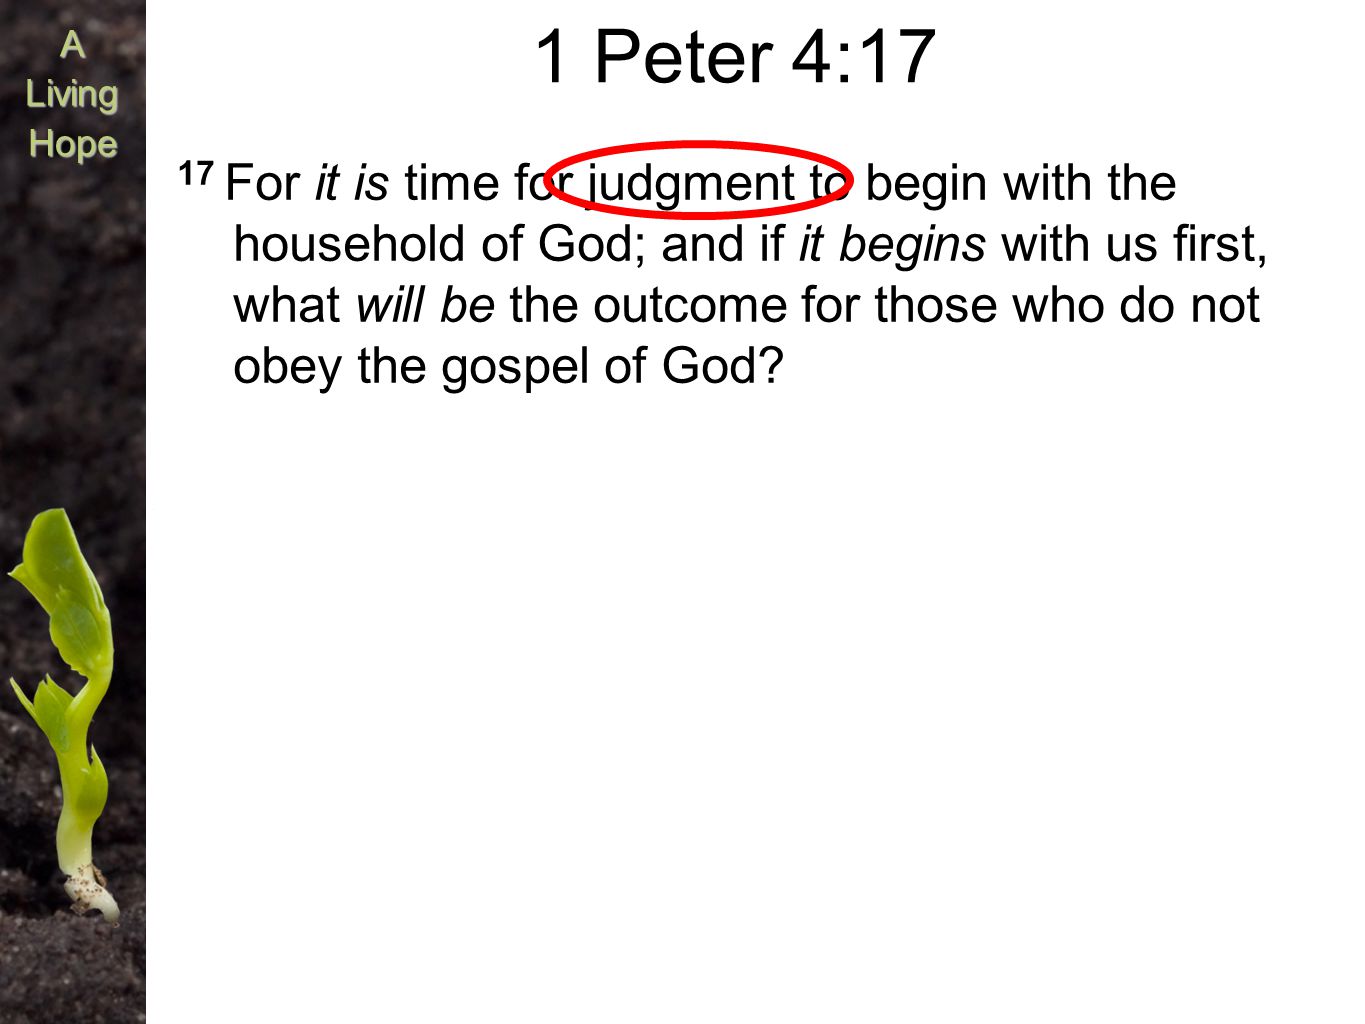 A Living Hope 1 Peter 4:17 17 For it is time for judgment to begin with the household of God; and if it begins with us first, what will be the outcome for those who do not obey the gospel of God